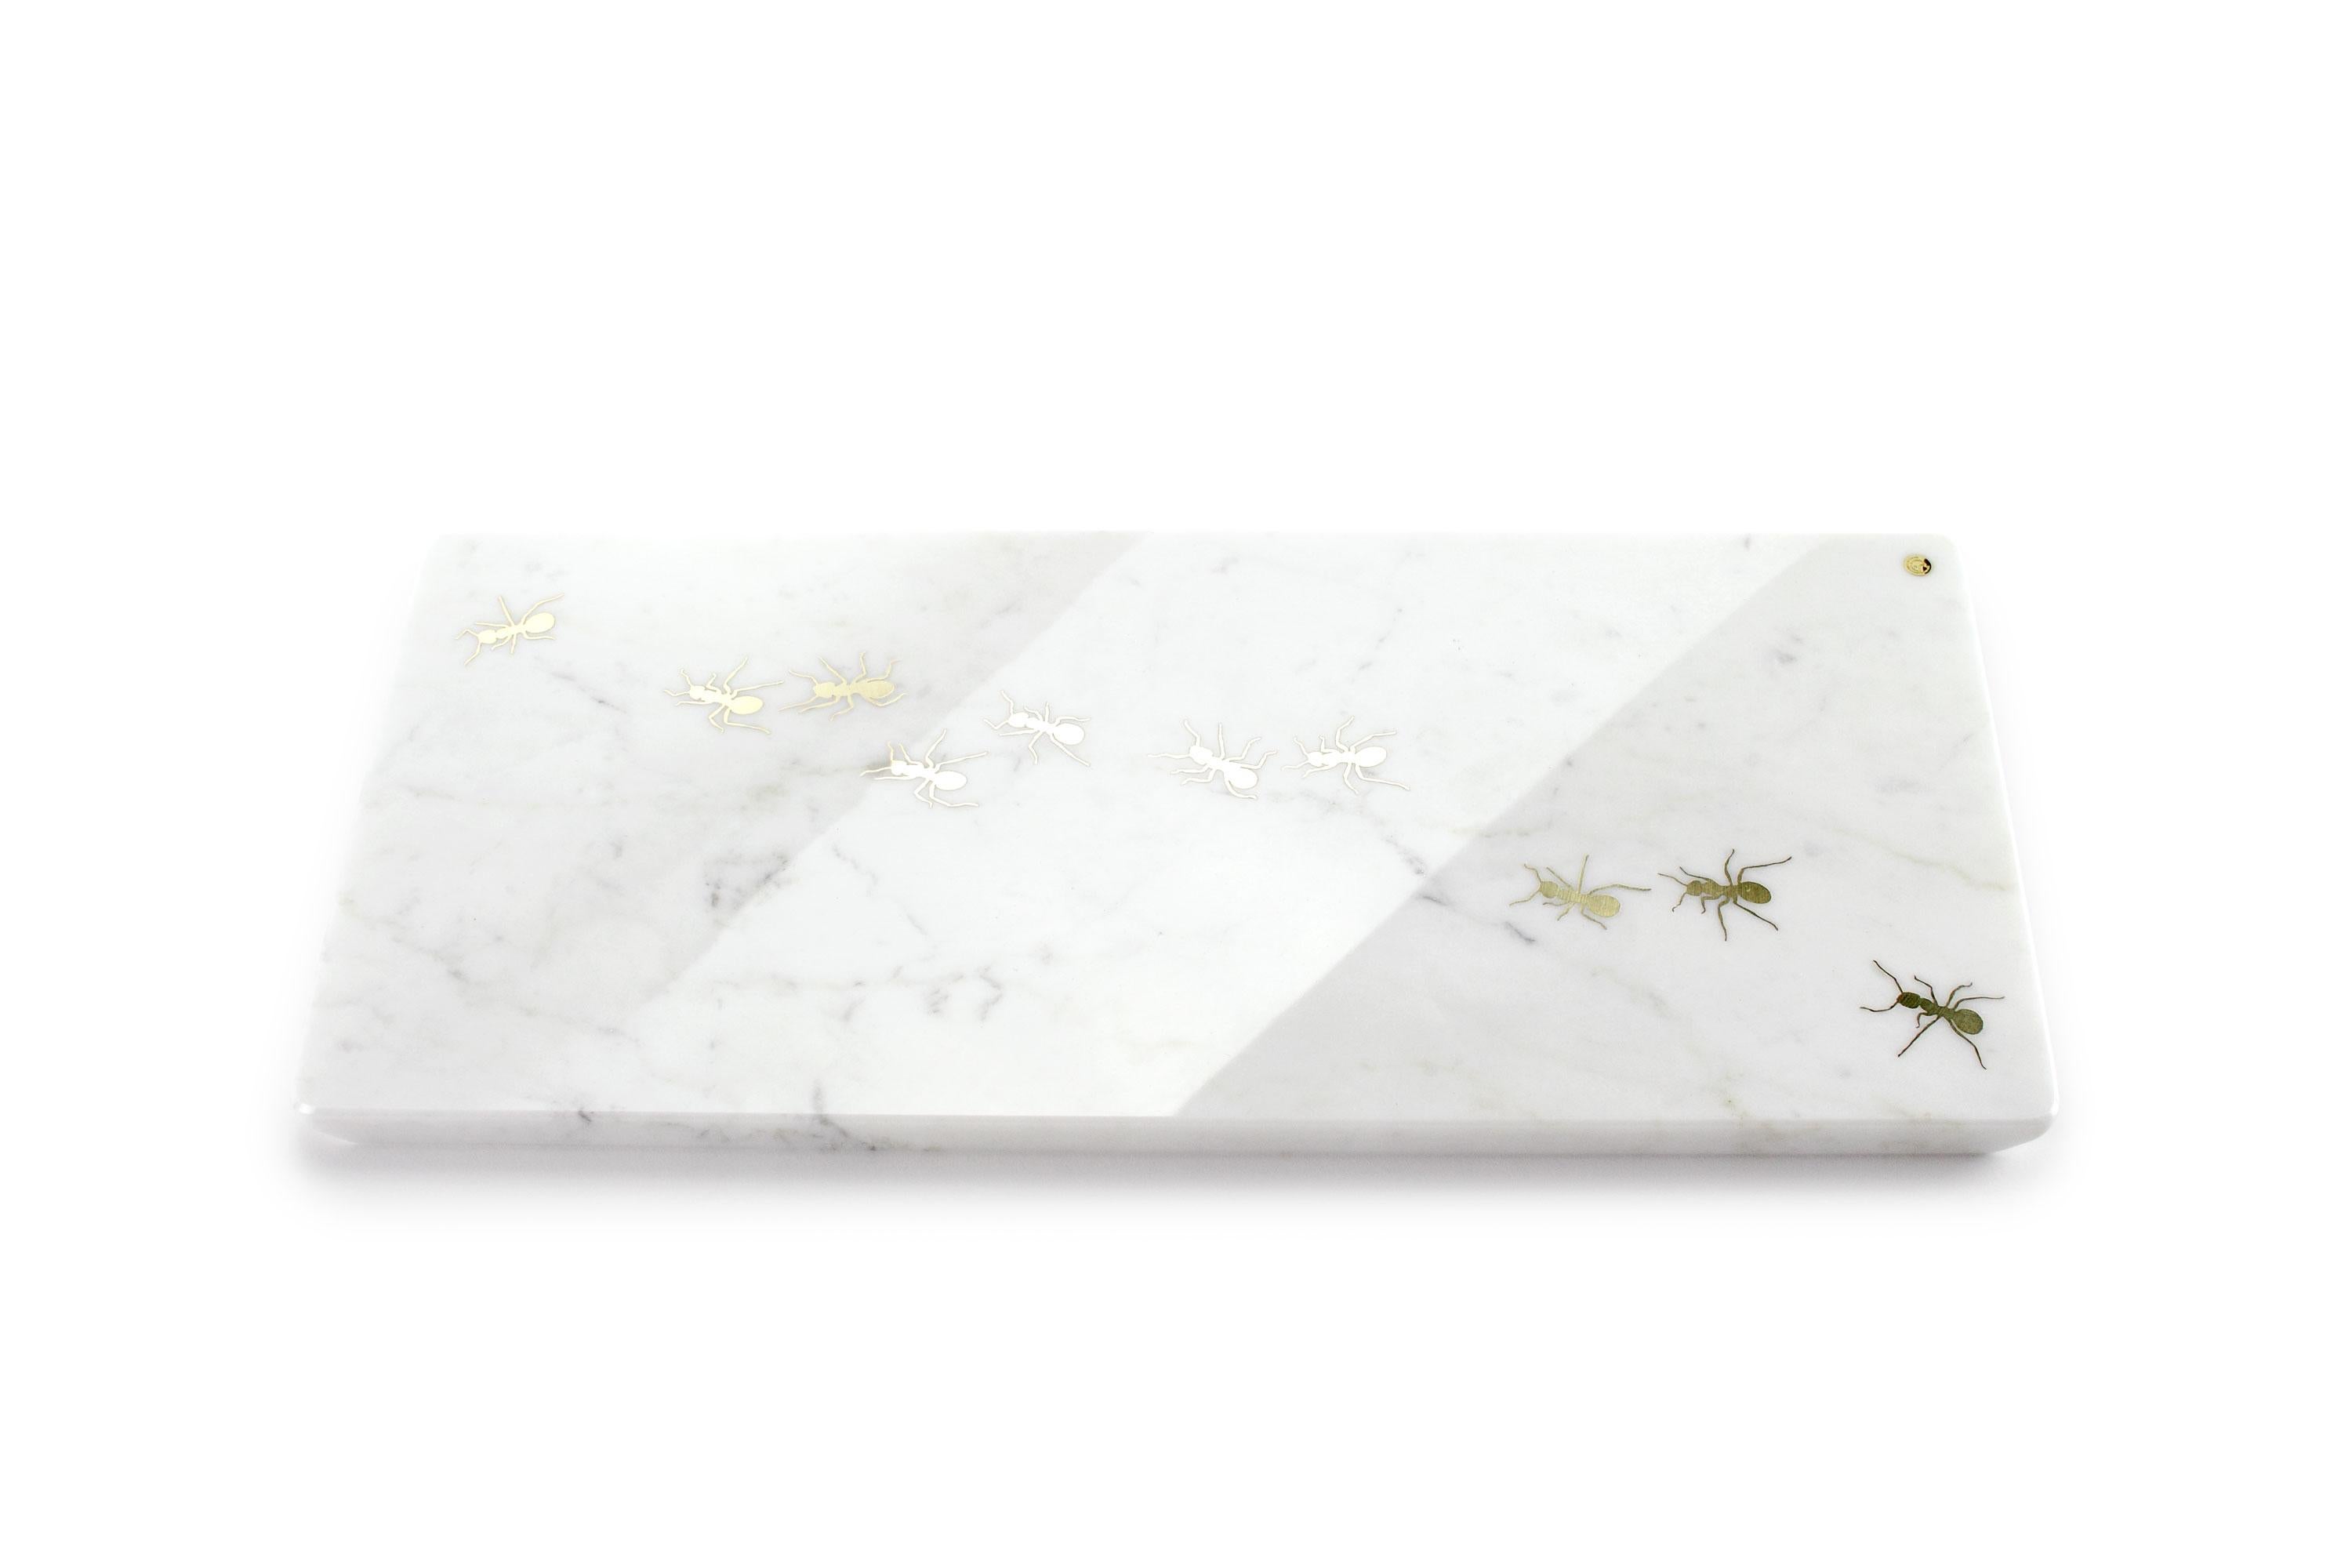 Centerpiece / Serving plate in white Carrara marble with polished brass inlay.

Dimensions: Big - L 45 W 20.5 H 1.5 cm
Also available: Medium - L 45 W 12 H 1.5 cm or Small - L 26 W 11 H 1.5 cm

100% Hand made in Italy. 

Marble is a natural